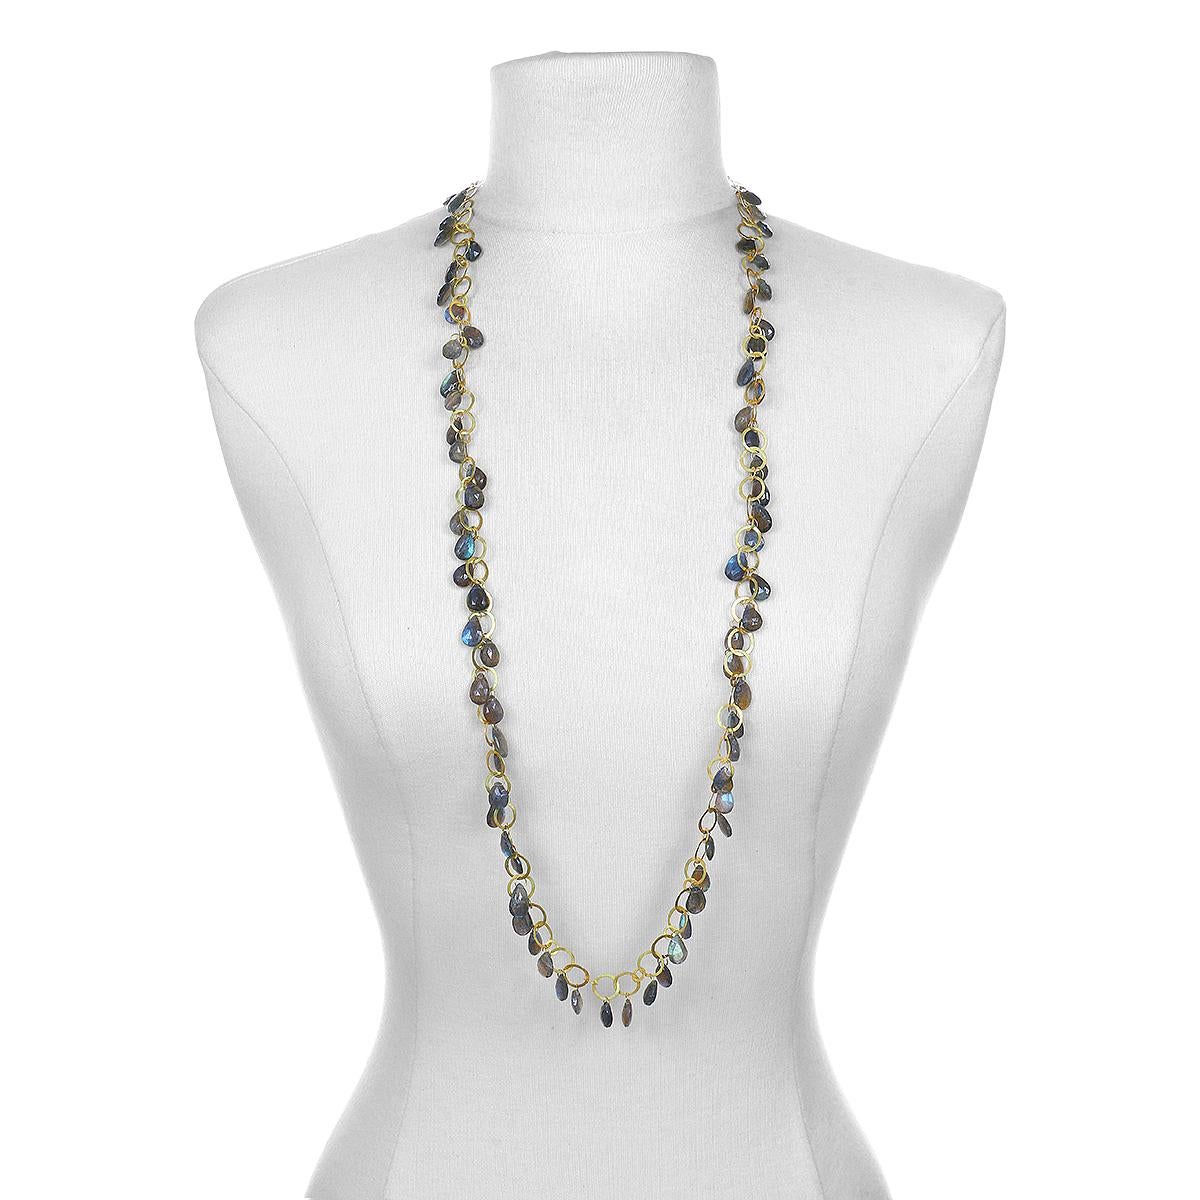 Faye Kim's spectacular 18 Karat Gold Labradorite Briolette Fringe Necklace conveys a modern design that offers understated elegance and a truly stylish, everyday look. Labradorite, which is treasured for its remarkable play of color, is believed to